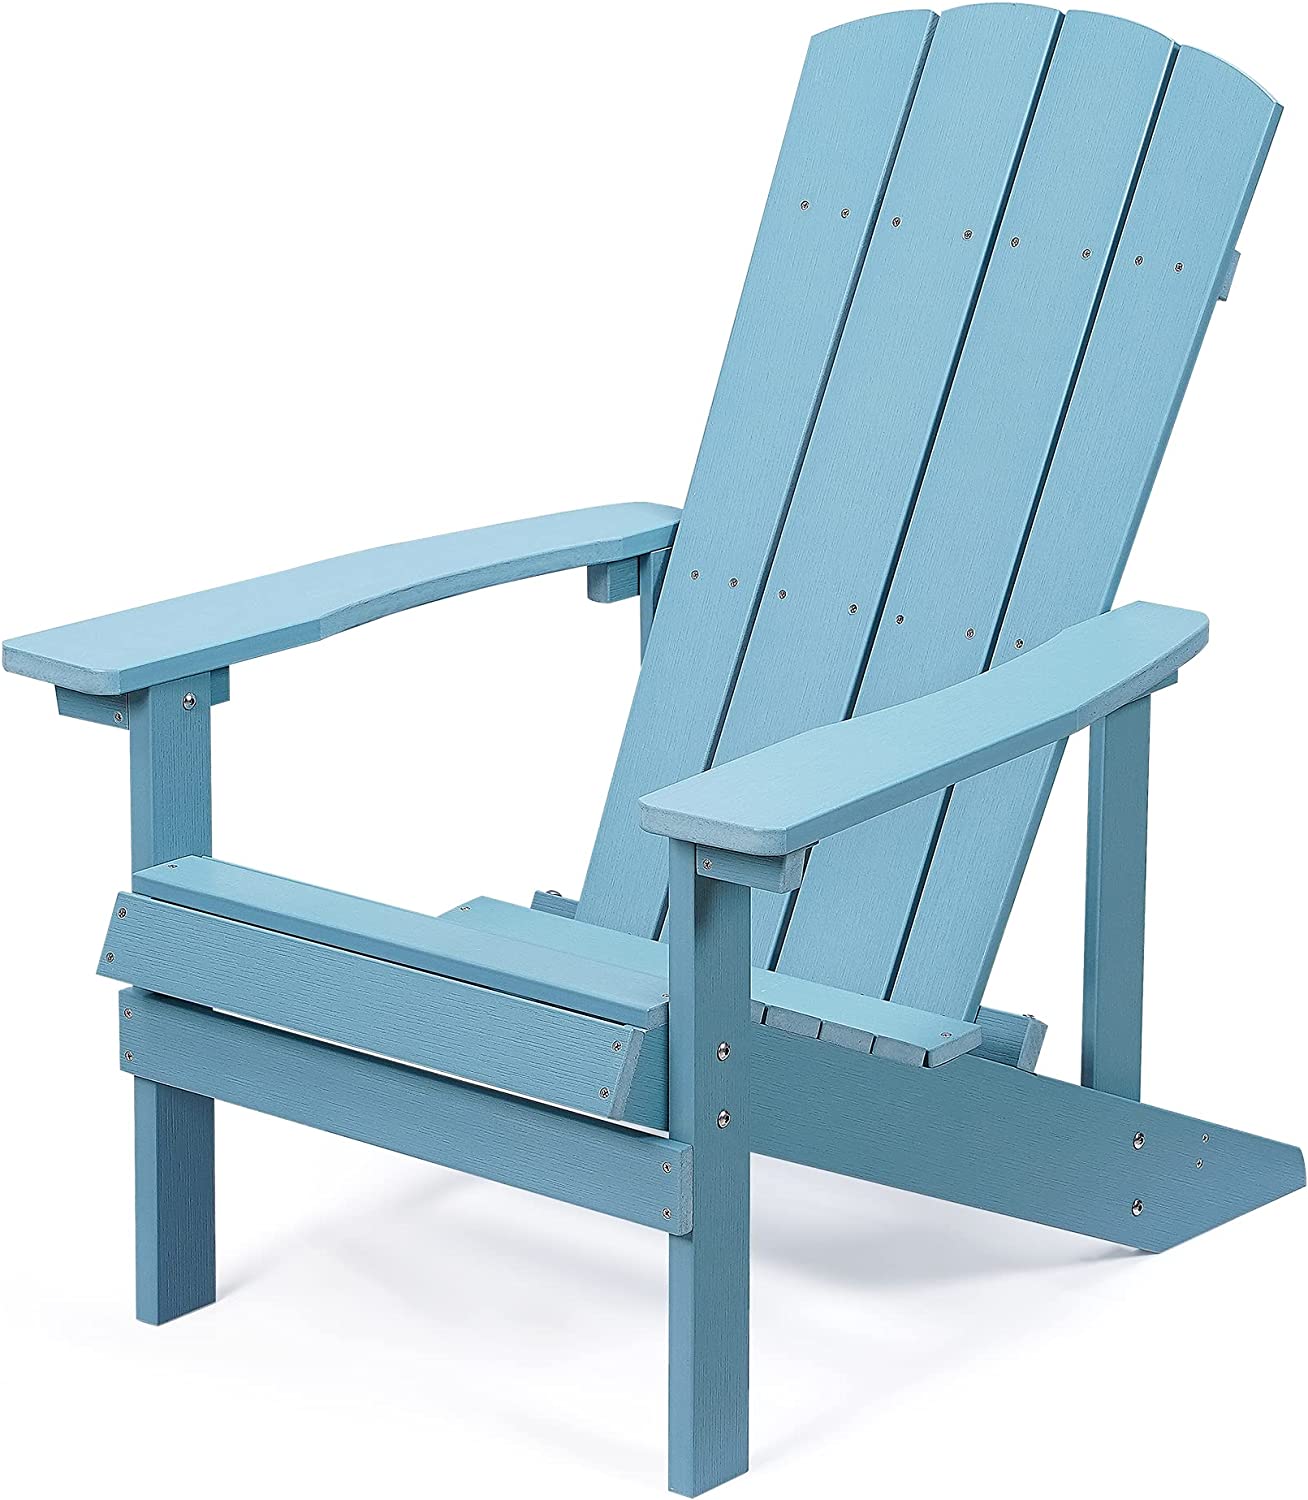 Plastic Adirondack Chair, Weather Resistant Patio Chairs, Outdoor Deck Fire Pit Chairs